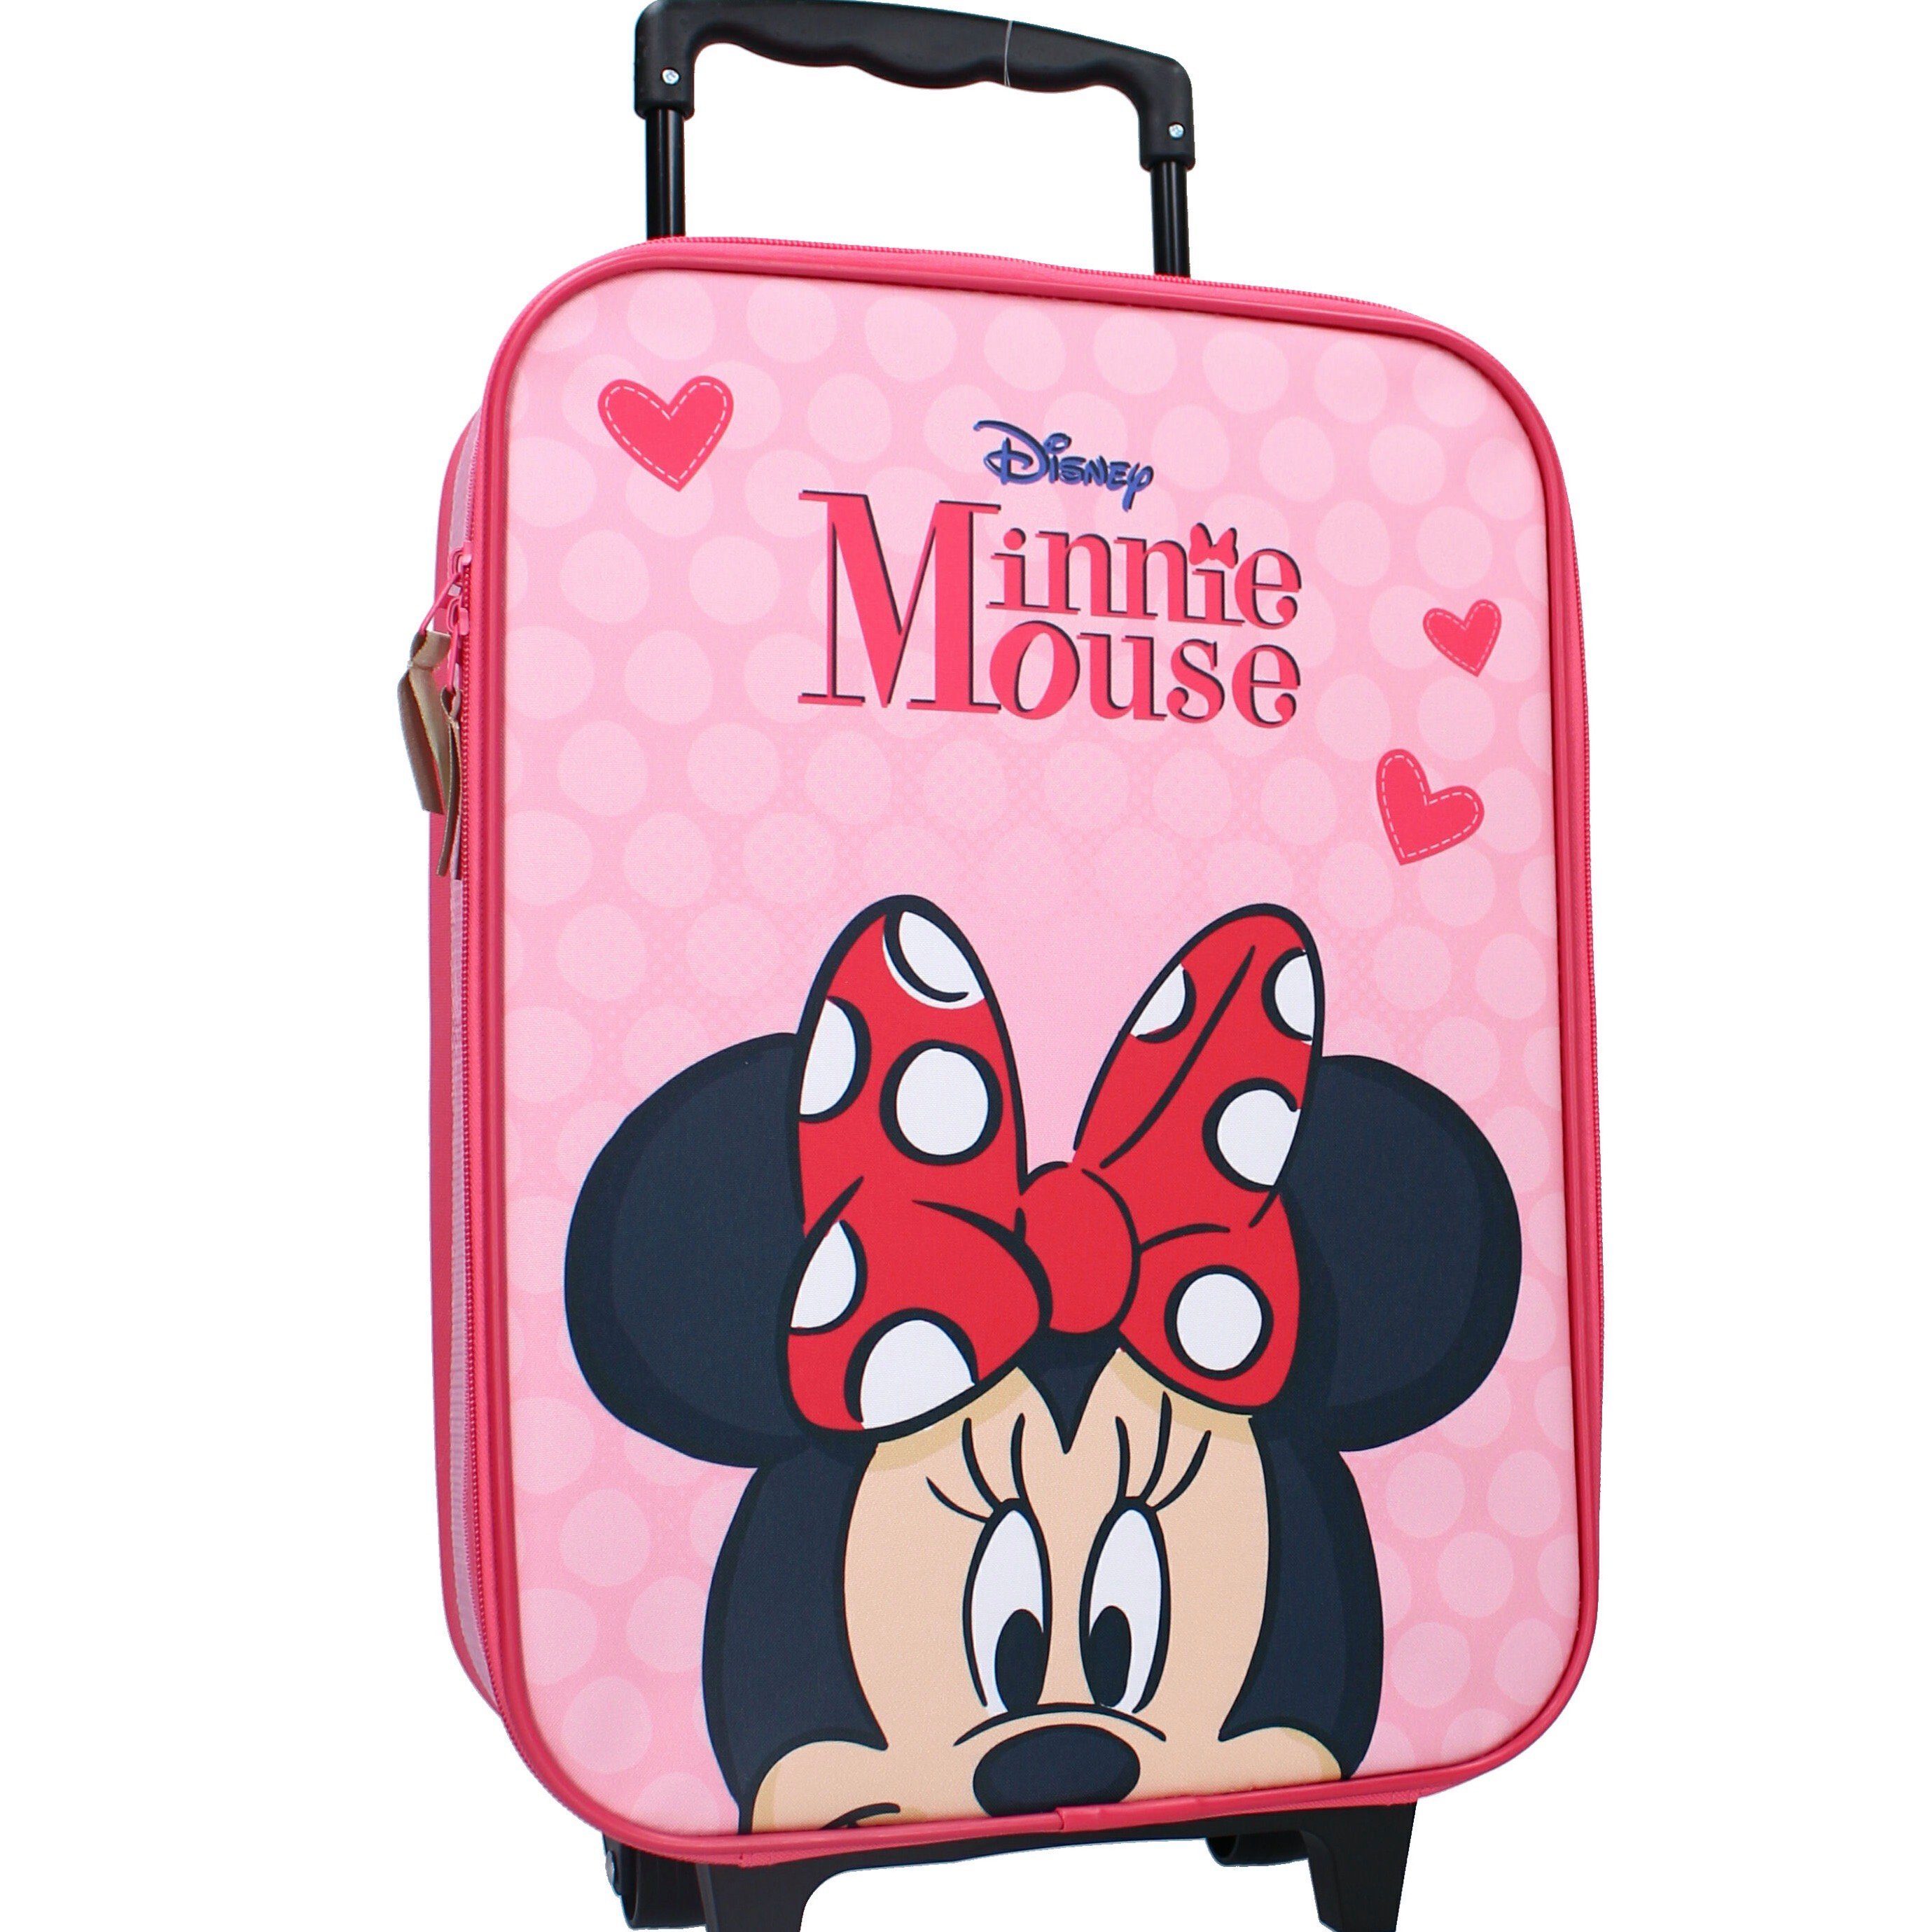 Disney Pink, Trolley 2 Minnie Trolley Maus Kinderkoffer Mouse Rollen, Kindertrolley Minni